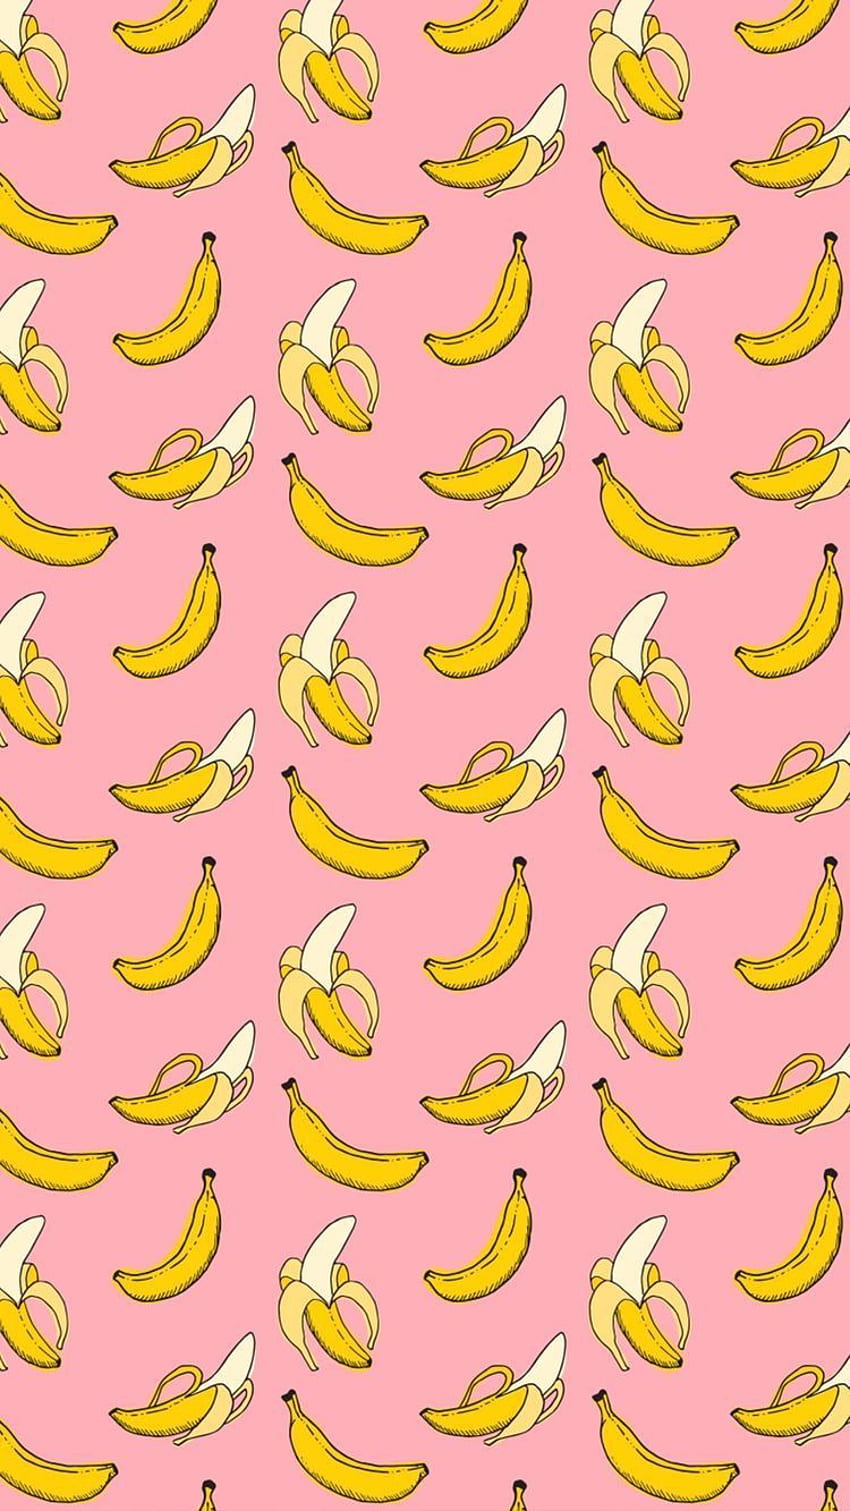 Cute Banana Mobile Phone Background Wallpaper Wallpaper Image For Free  Download  Pngtree